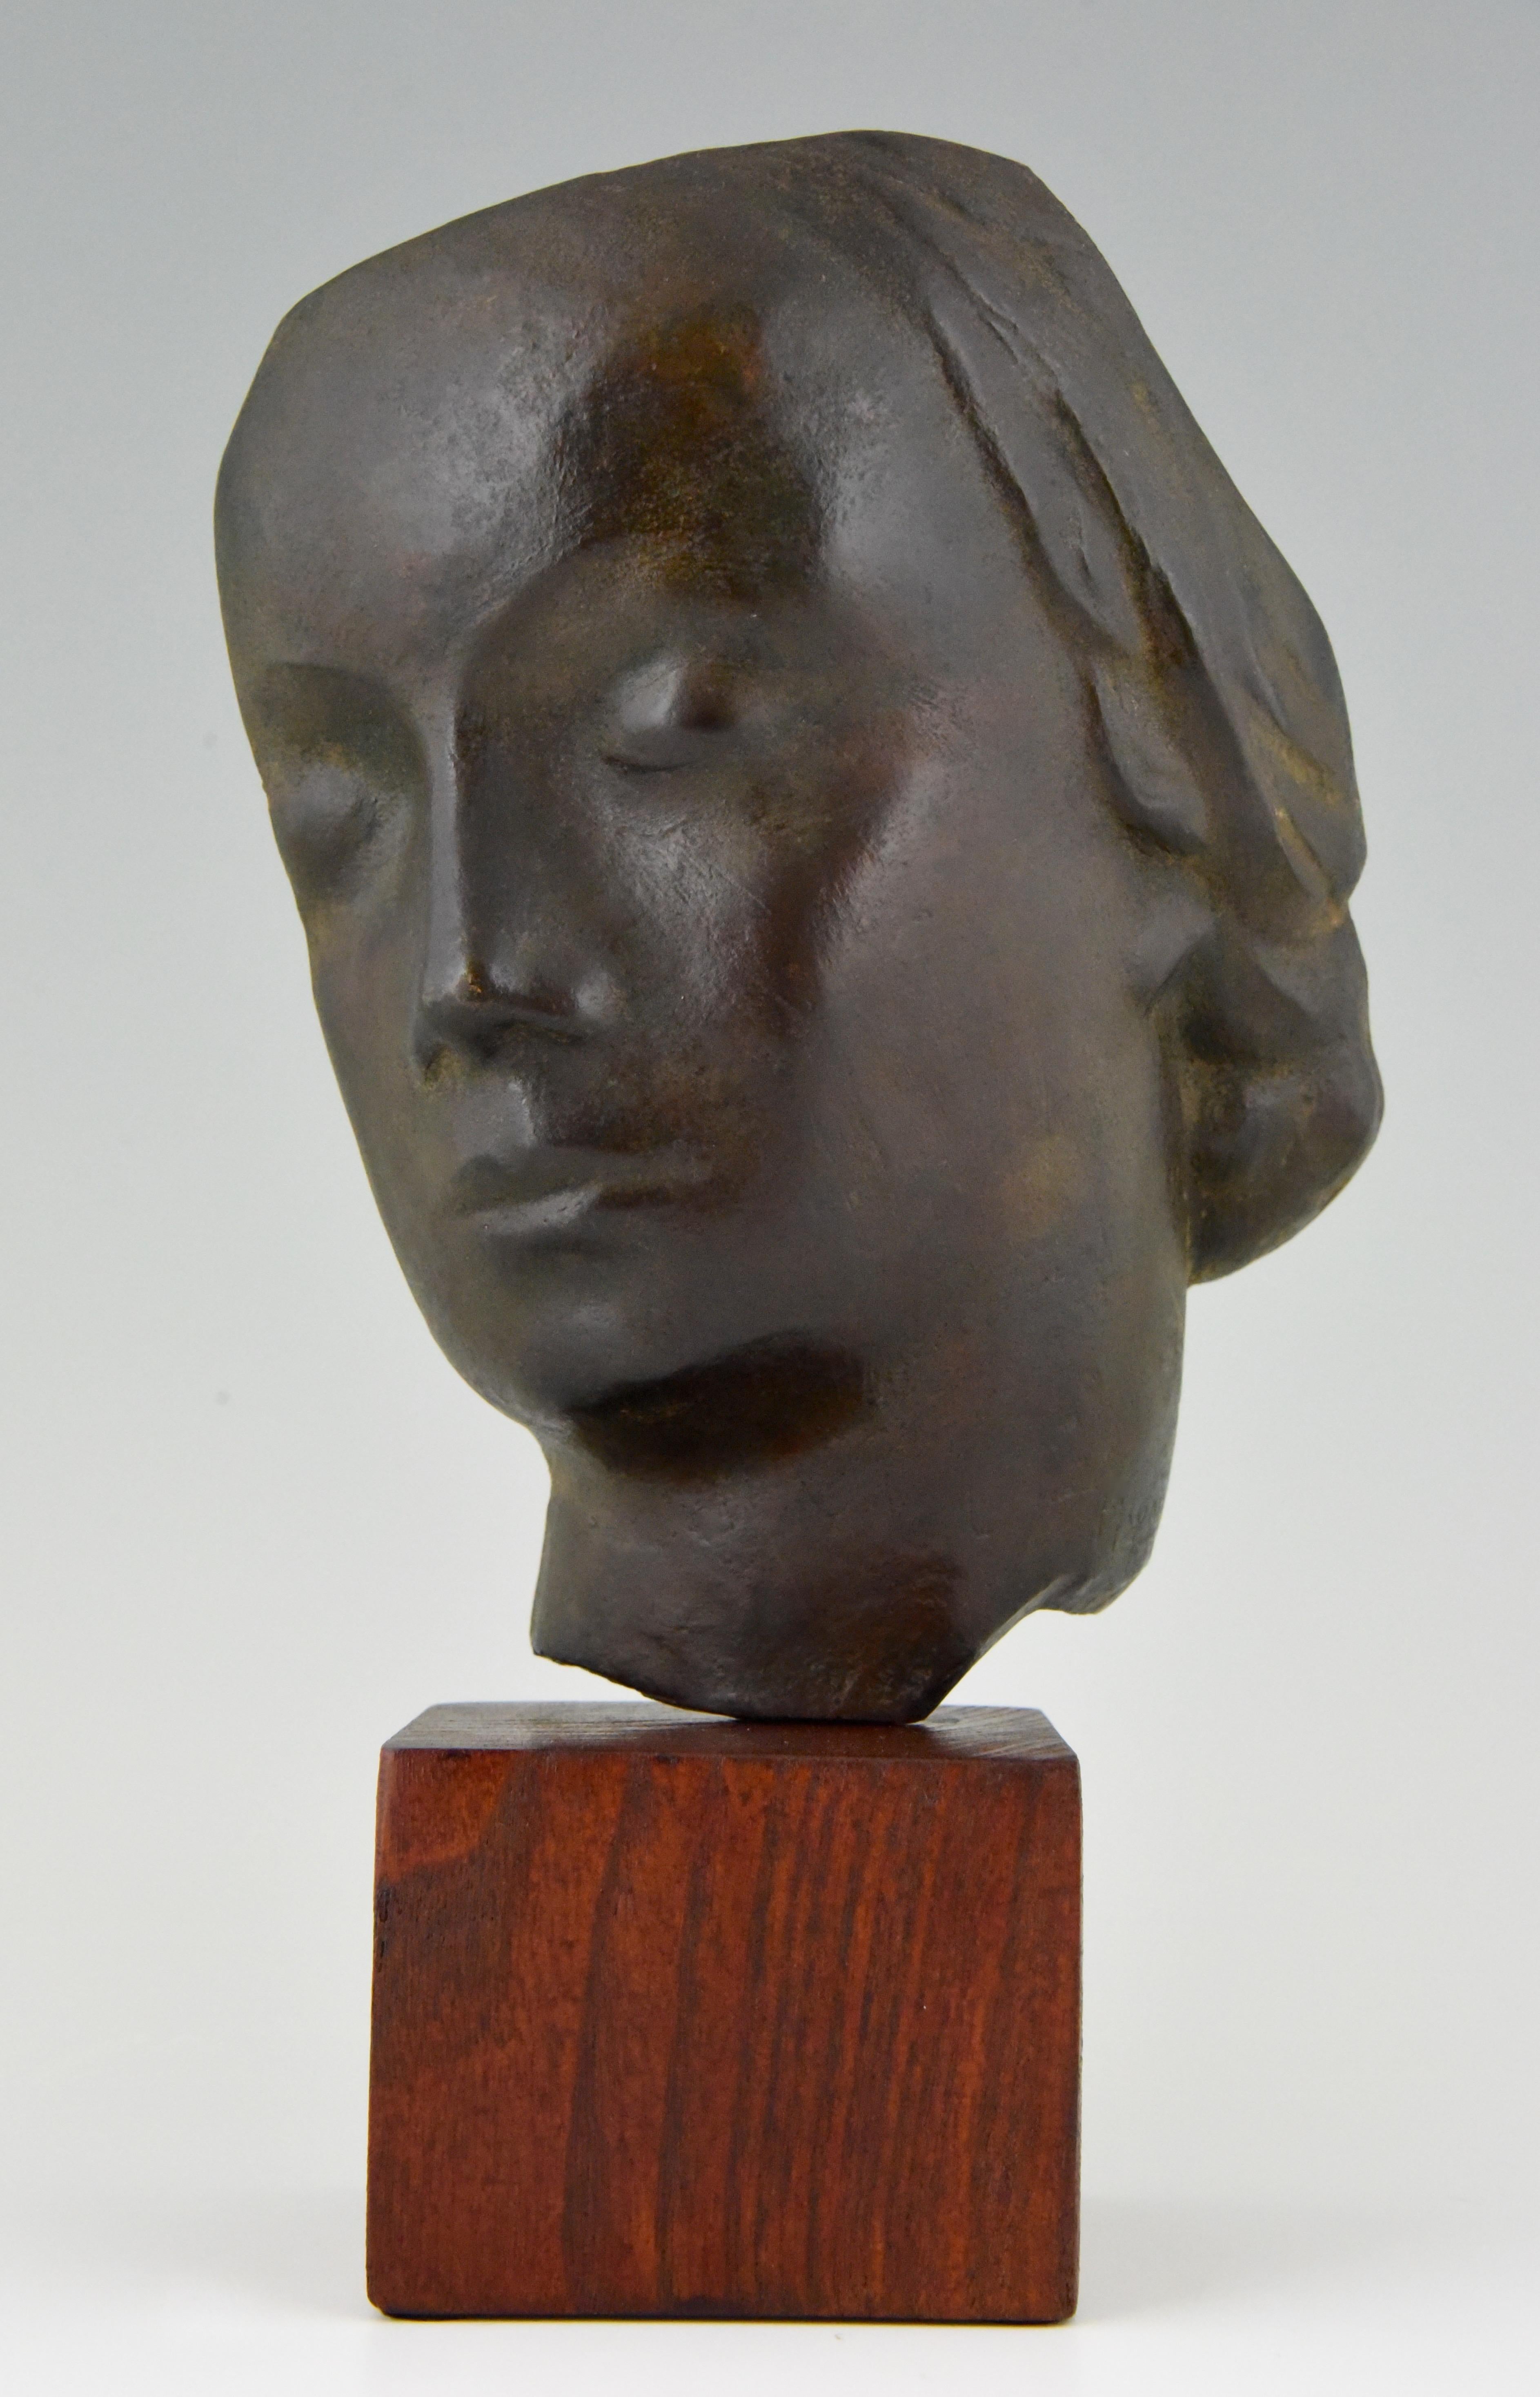 Hard to find bronze Art Deco sculpture of a woman's face by the French sculptor Francisque Lapandery, 1910-1961. The bronze has a black patina and stands on a wooden base. The artist lived and worked in Lyon.